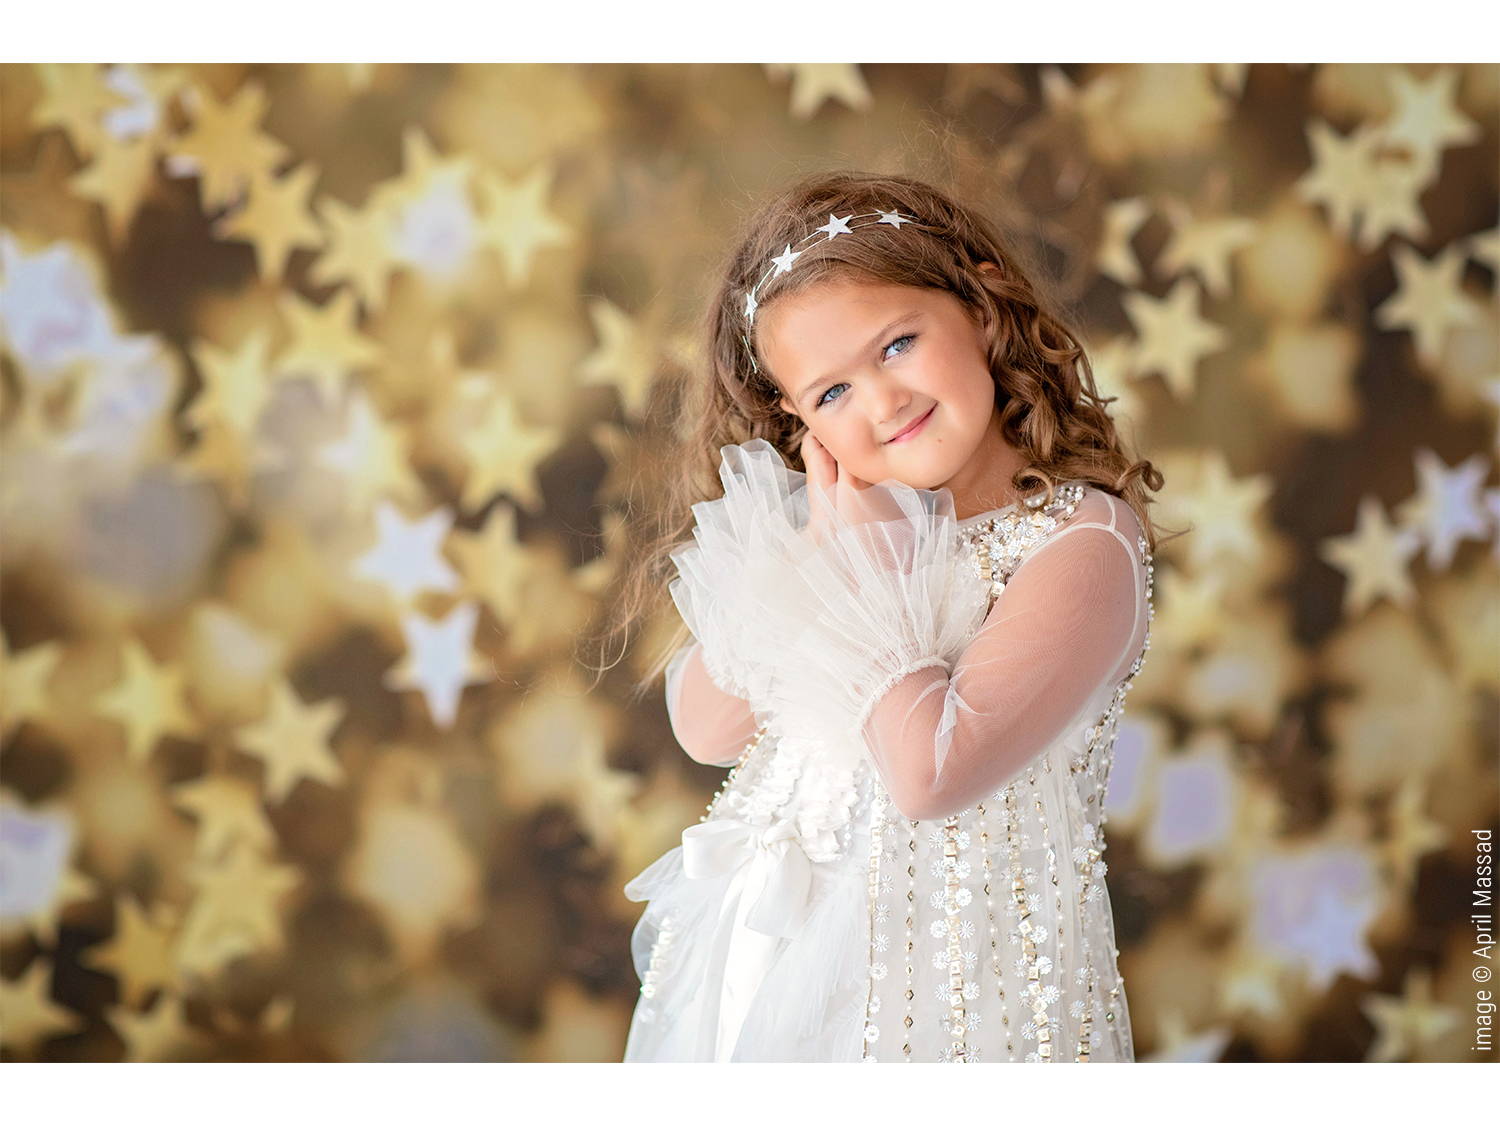 Gold Star - Photography Backdrop by Intuition Backgrounds